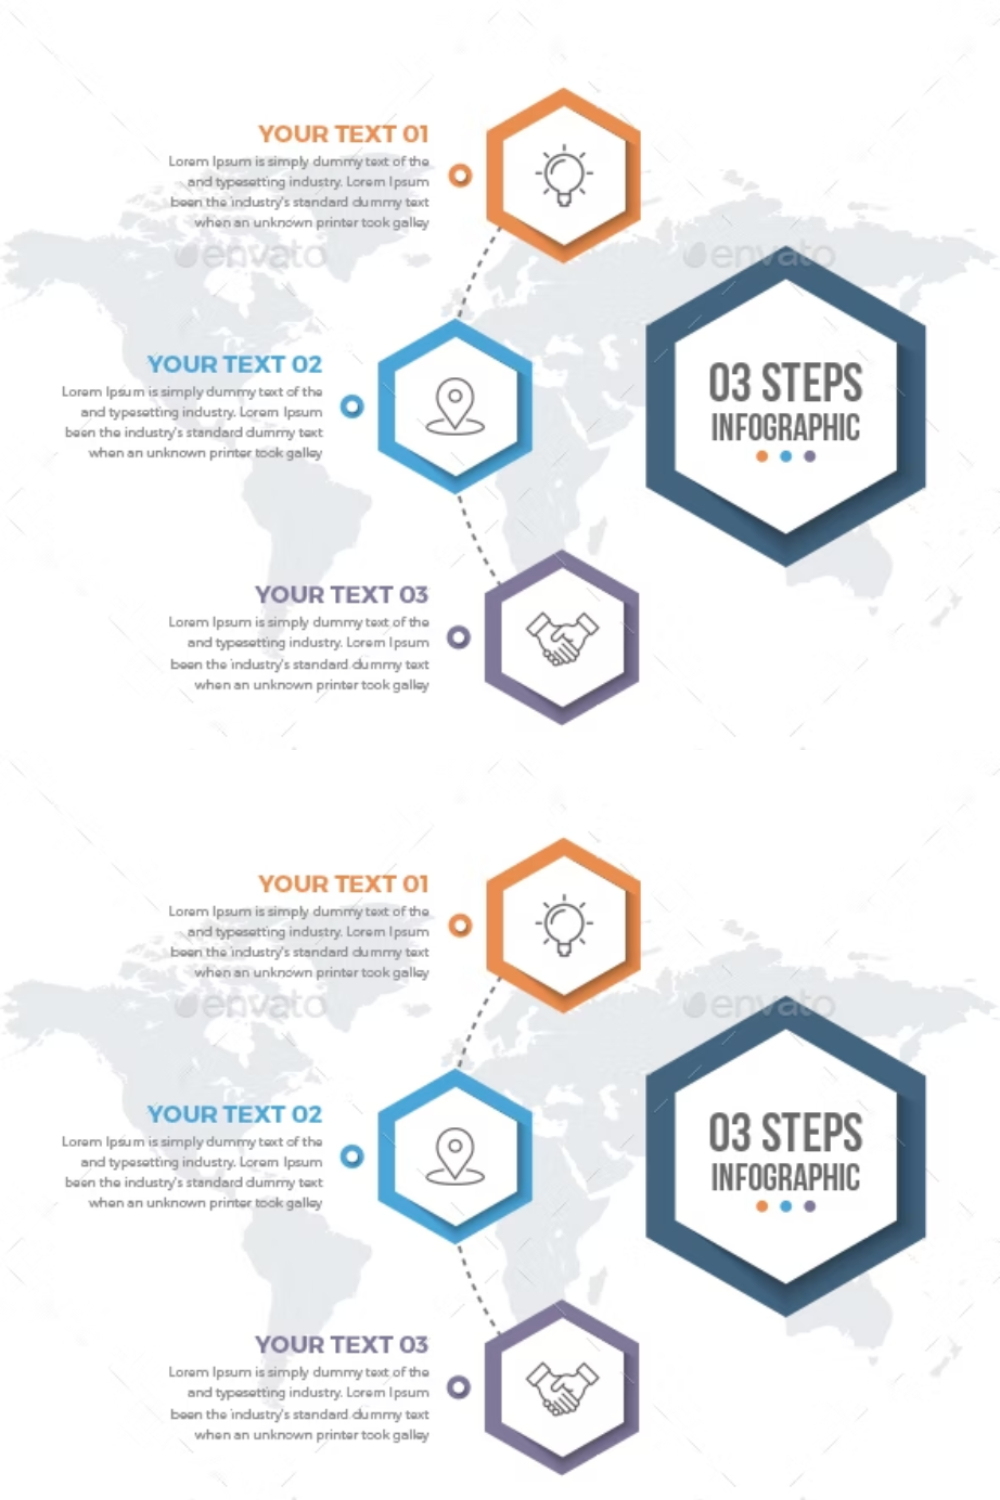 Infographics Template With 03 Steps Pinterest Cover.